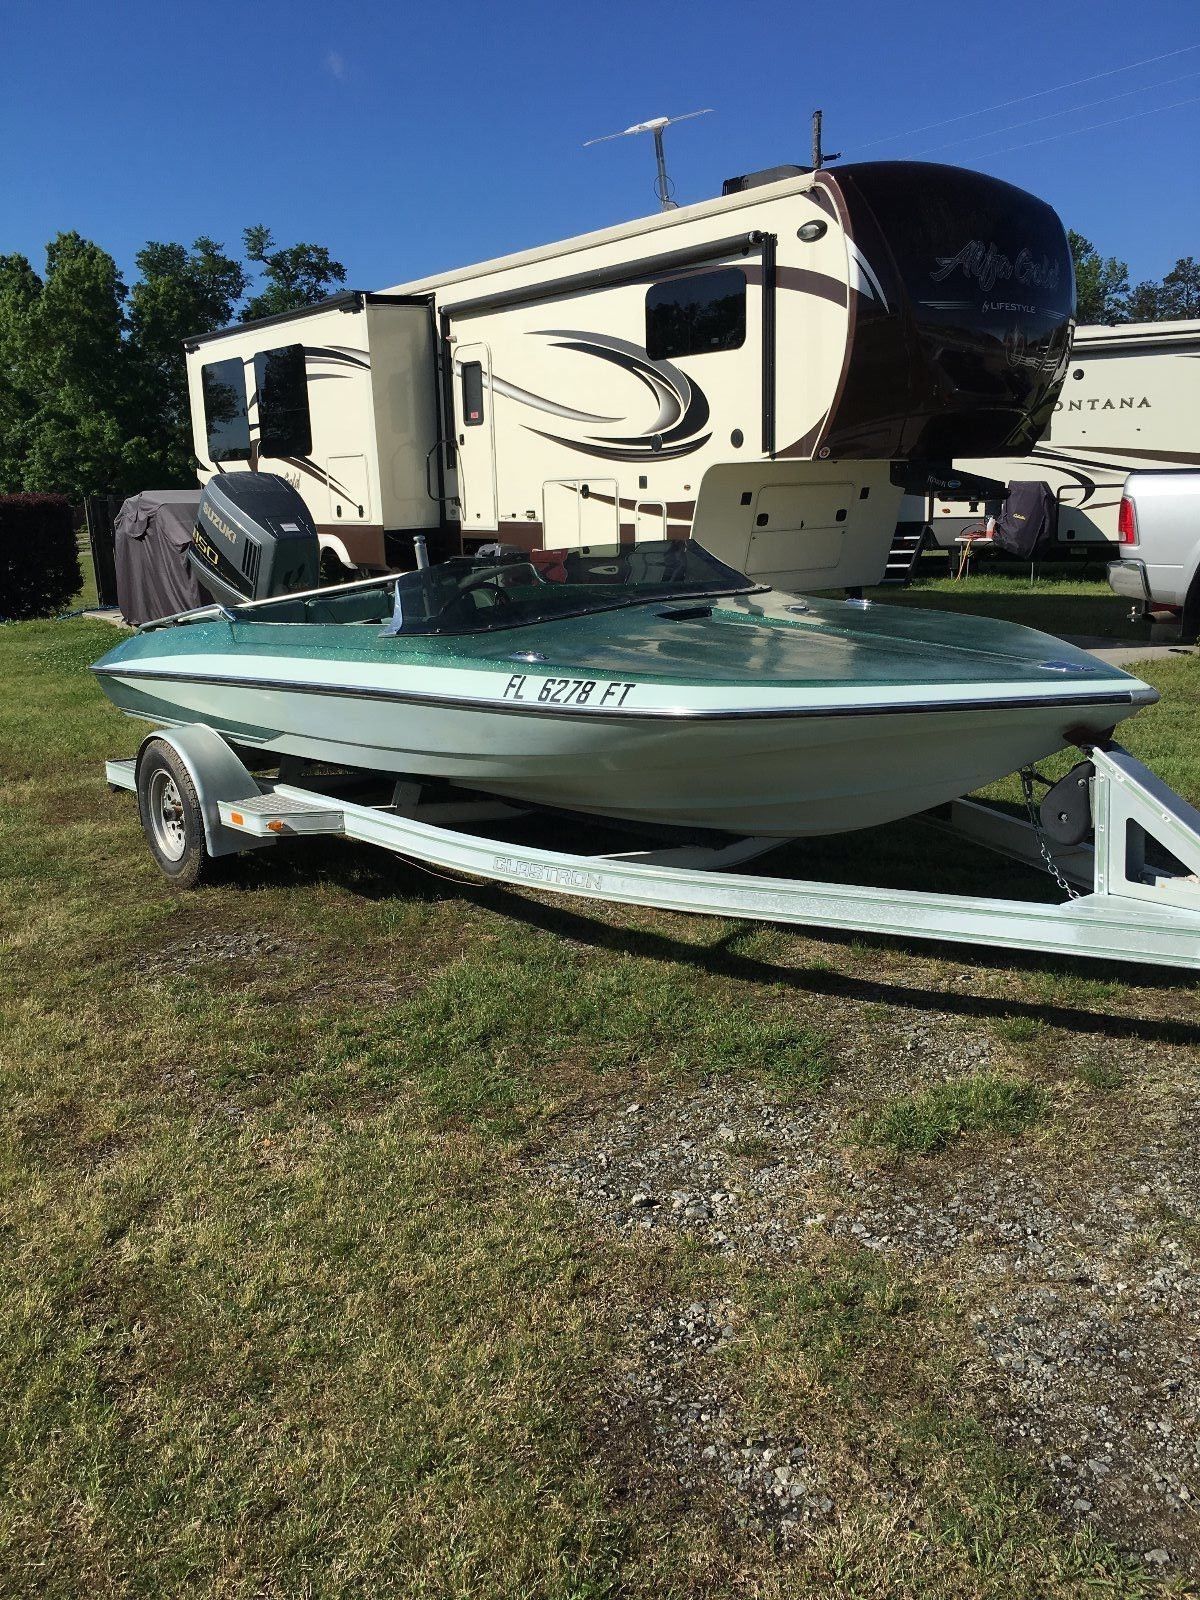 Glastron CVX-16 1980 for sale for $3,500 - Boats-from-USA.com